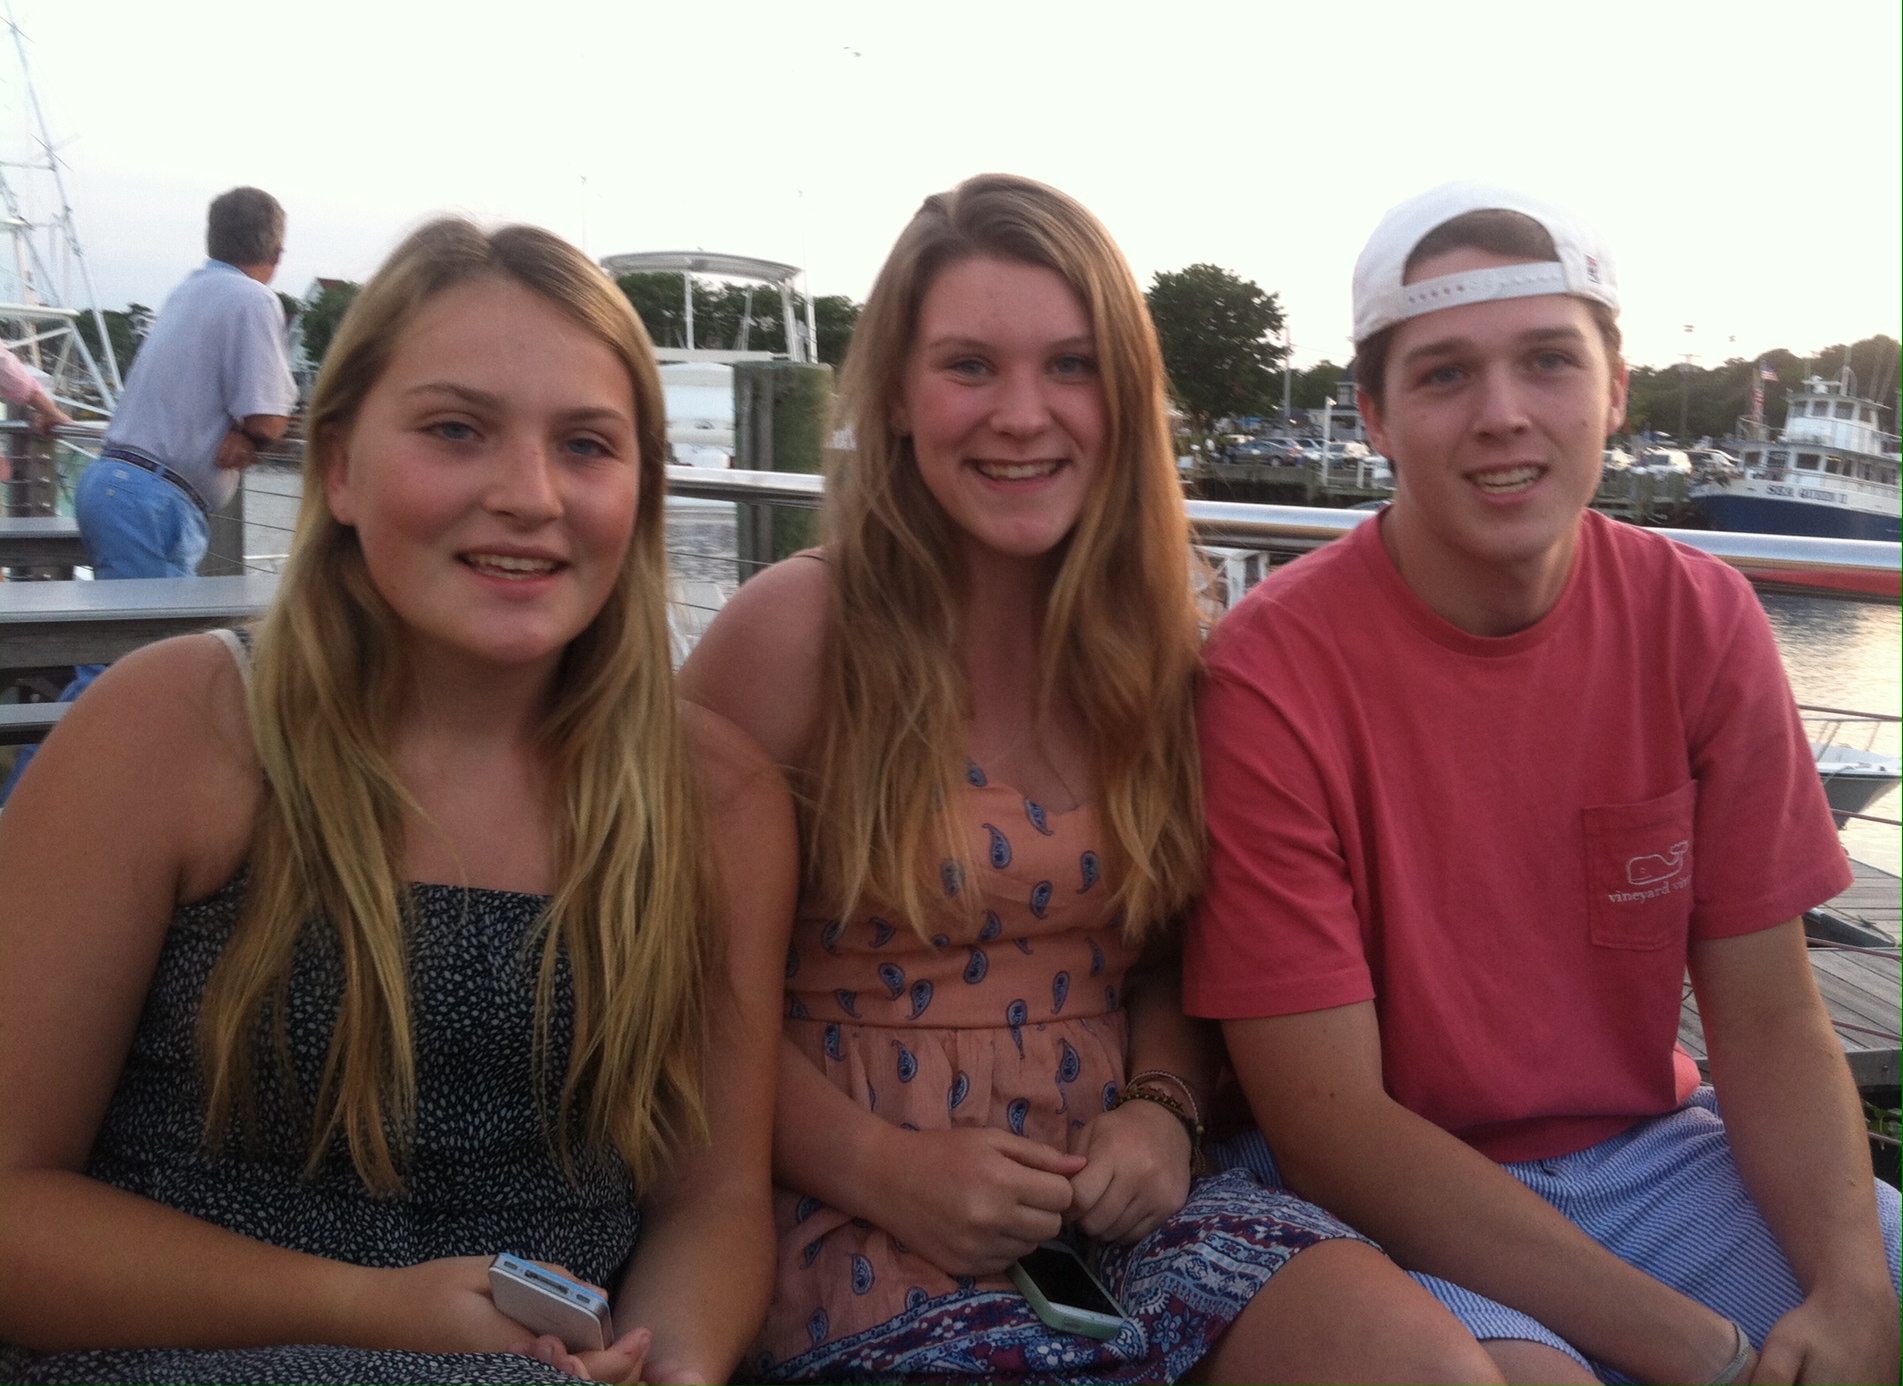 Sophie, Ellie, and Max chiilin' on the Cape